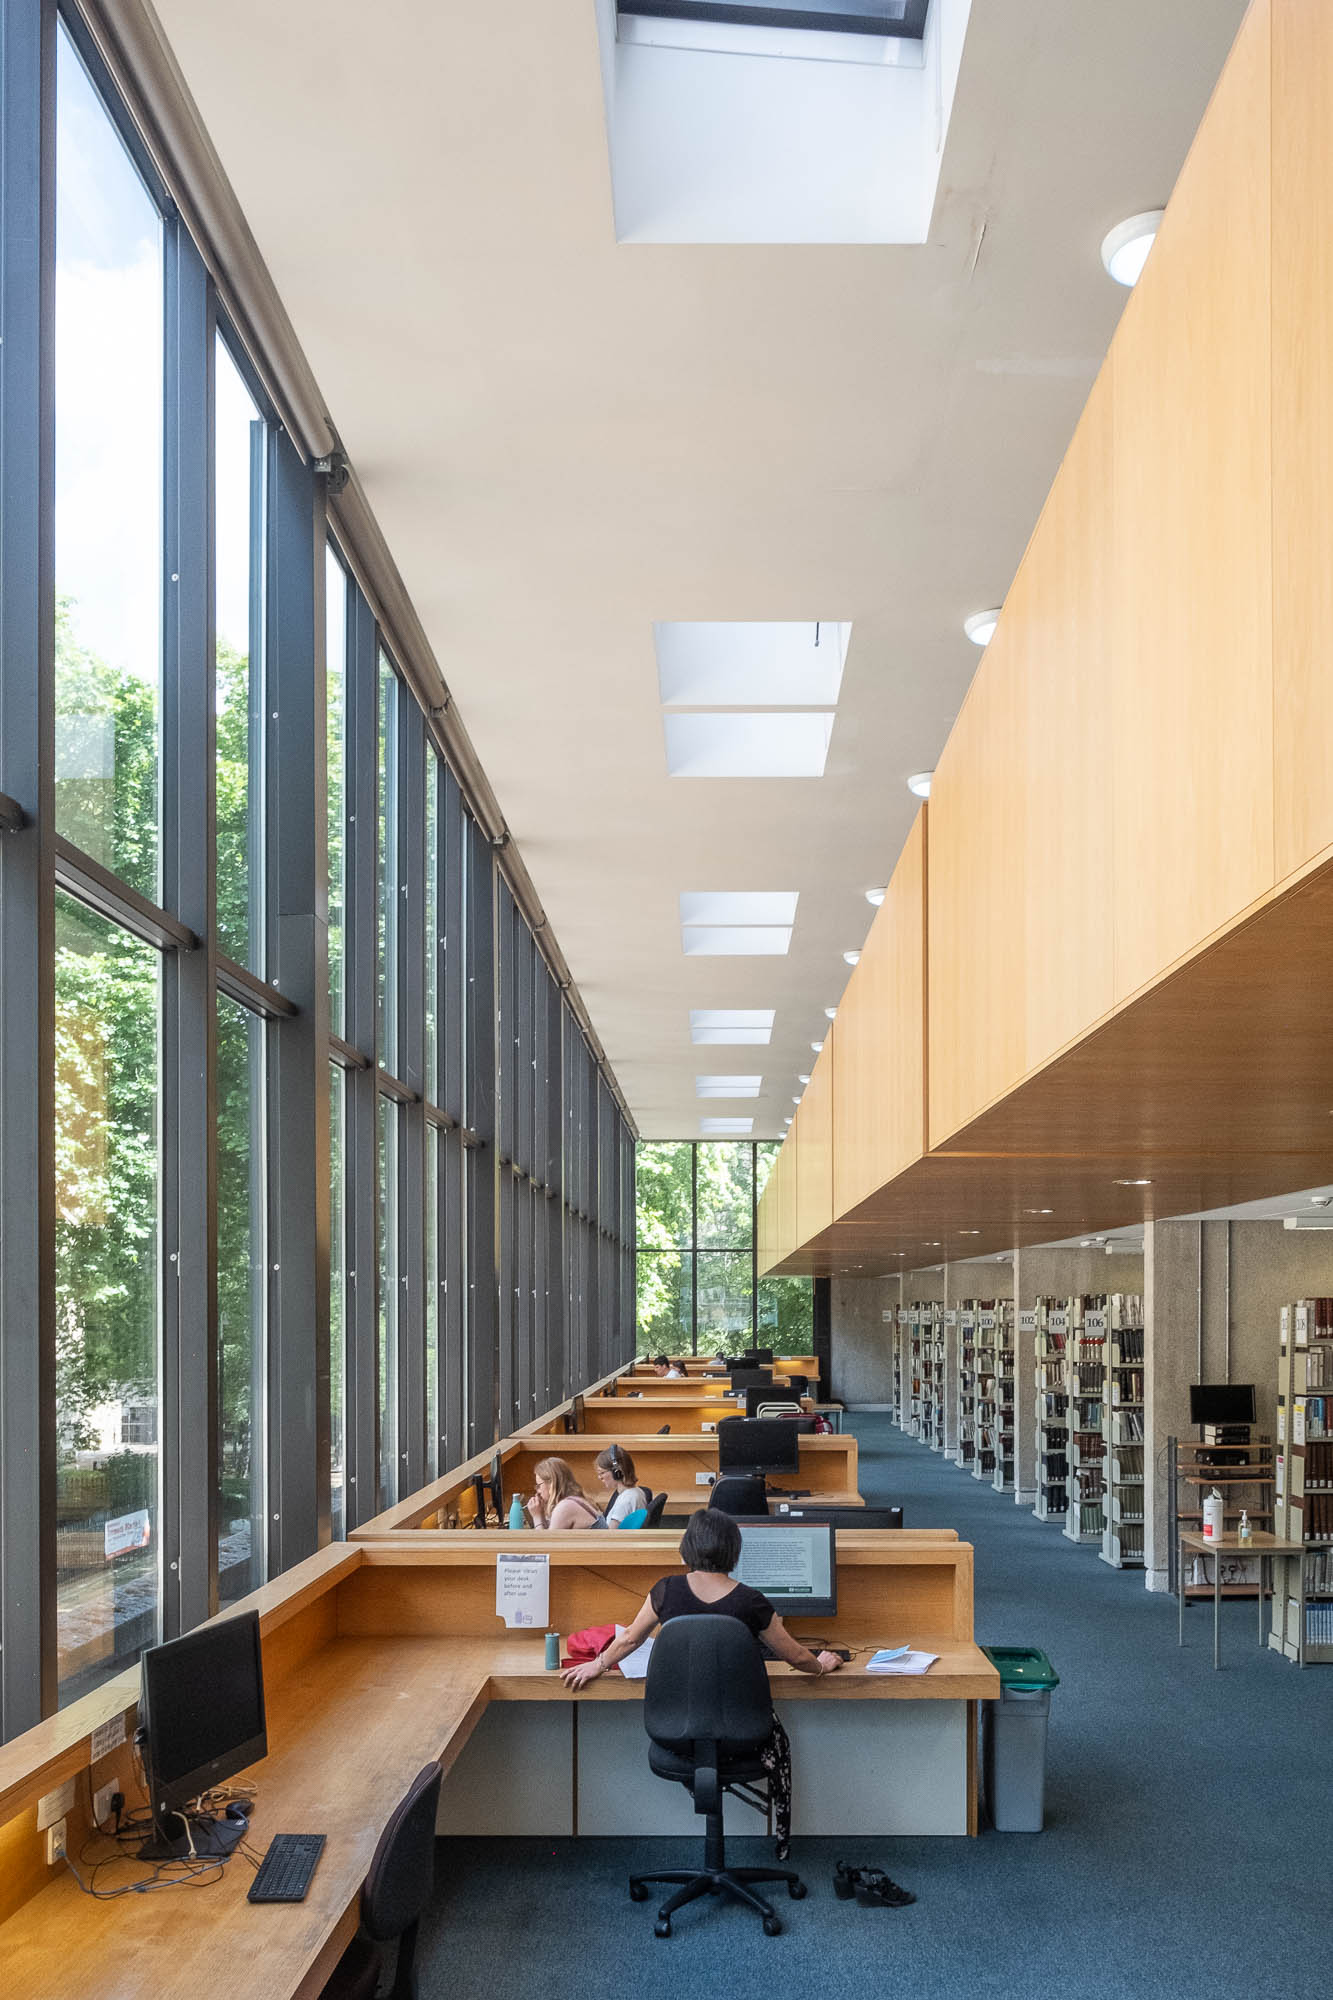 Interior of a modern library reading room with high windows to the left and a mezzanine covered in blond wood to the right. Patrons are seated at large cubicles next to the windows. Bookshelves are seen on the right.